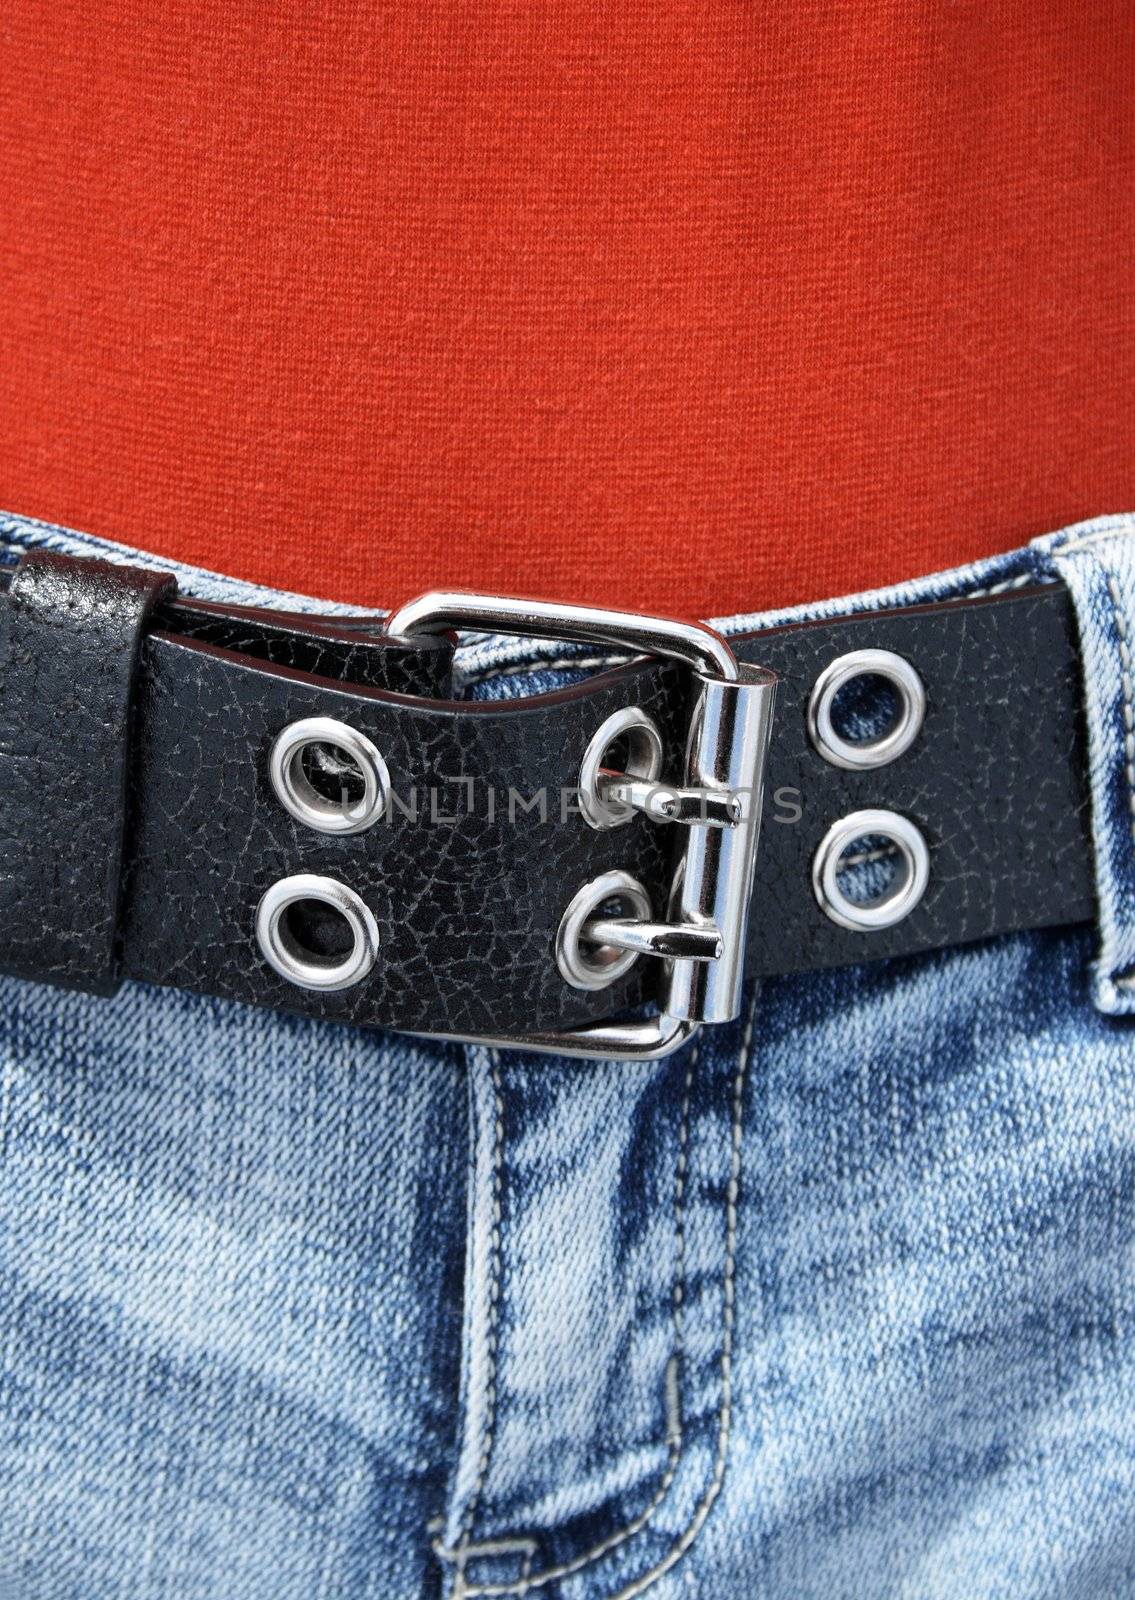 Black leather belt with metal buckle, worn with orange shirt and blue jeans.